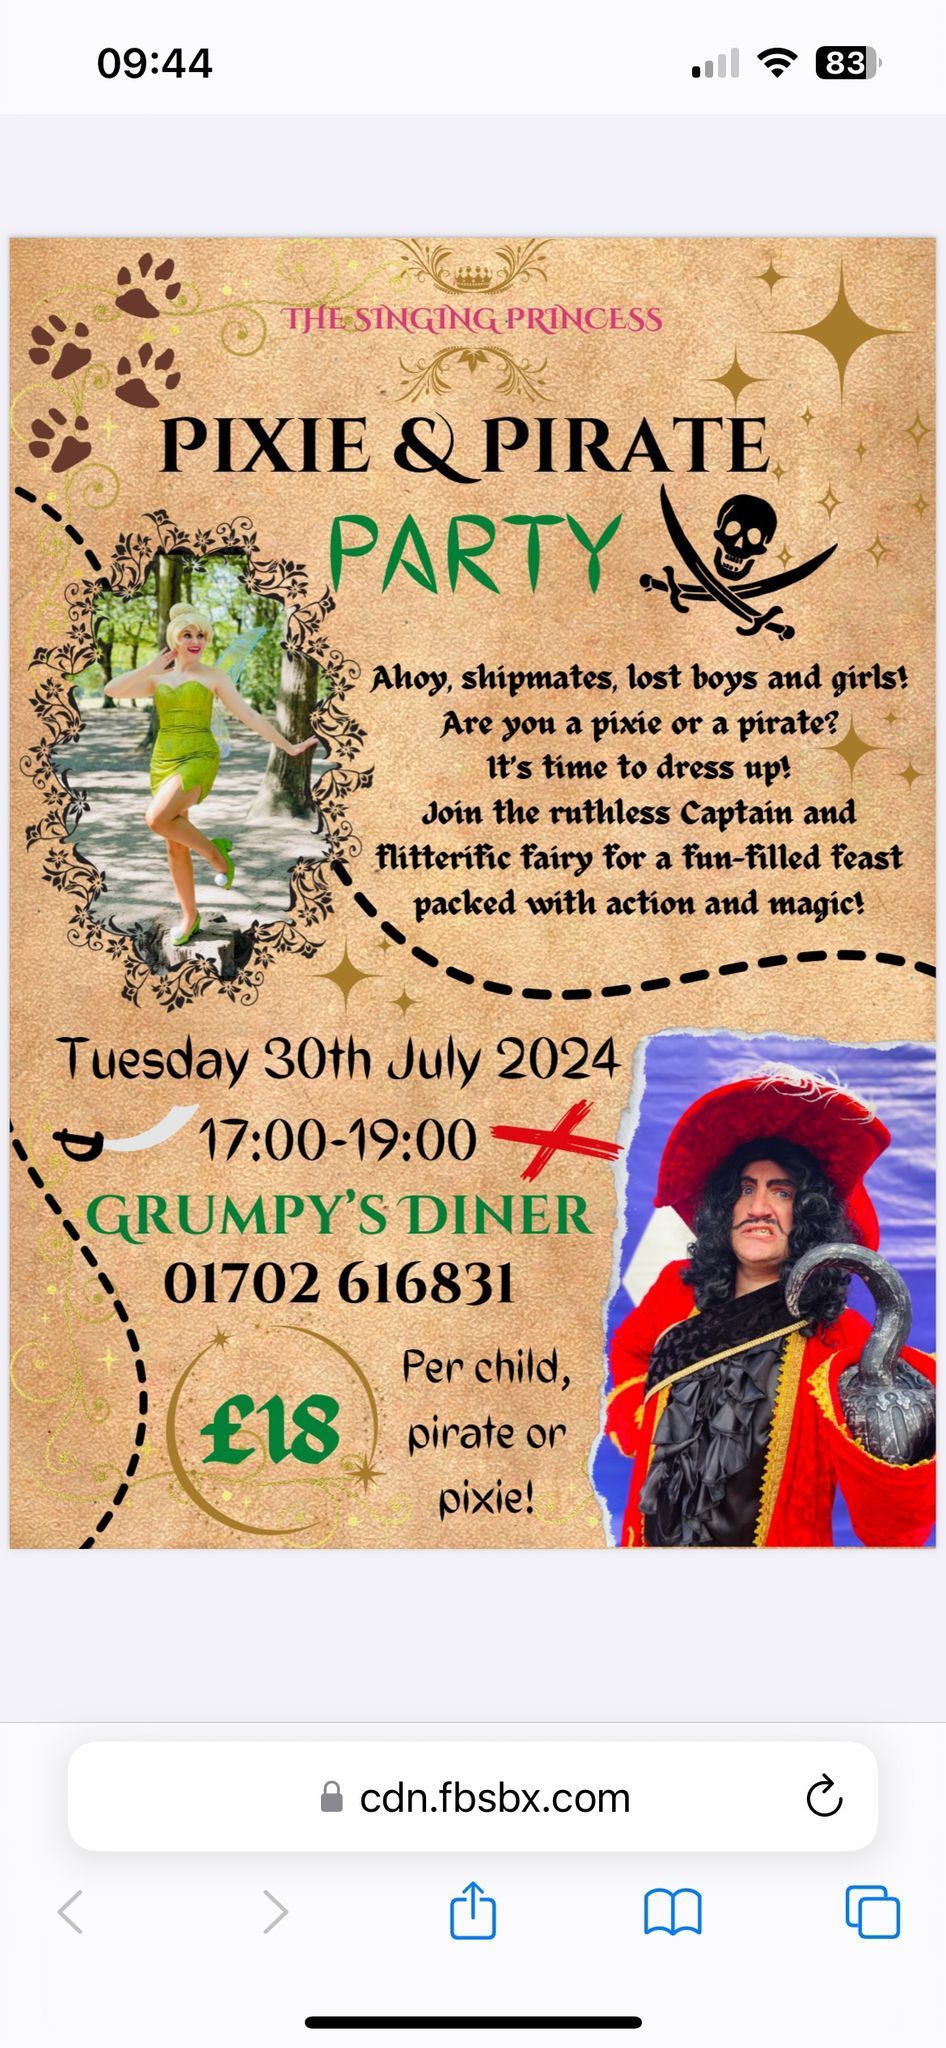 Pixie & Pirate Party 